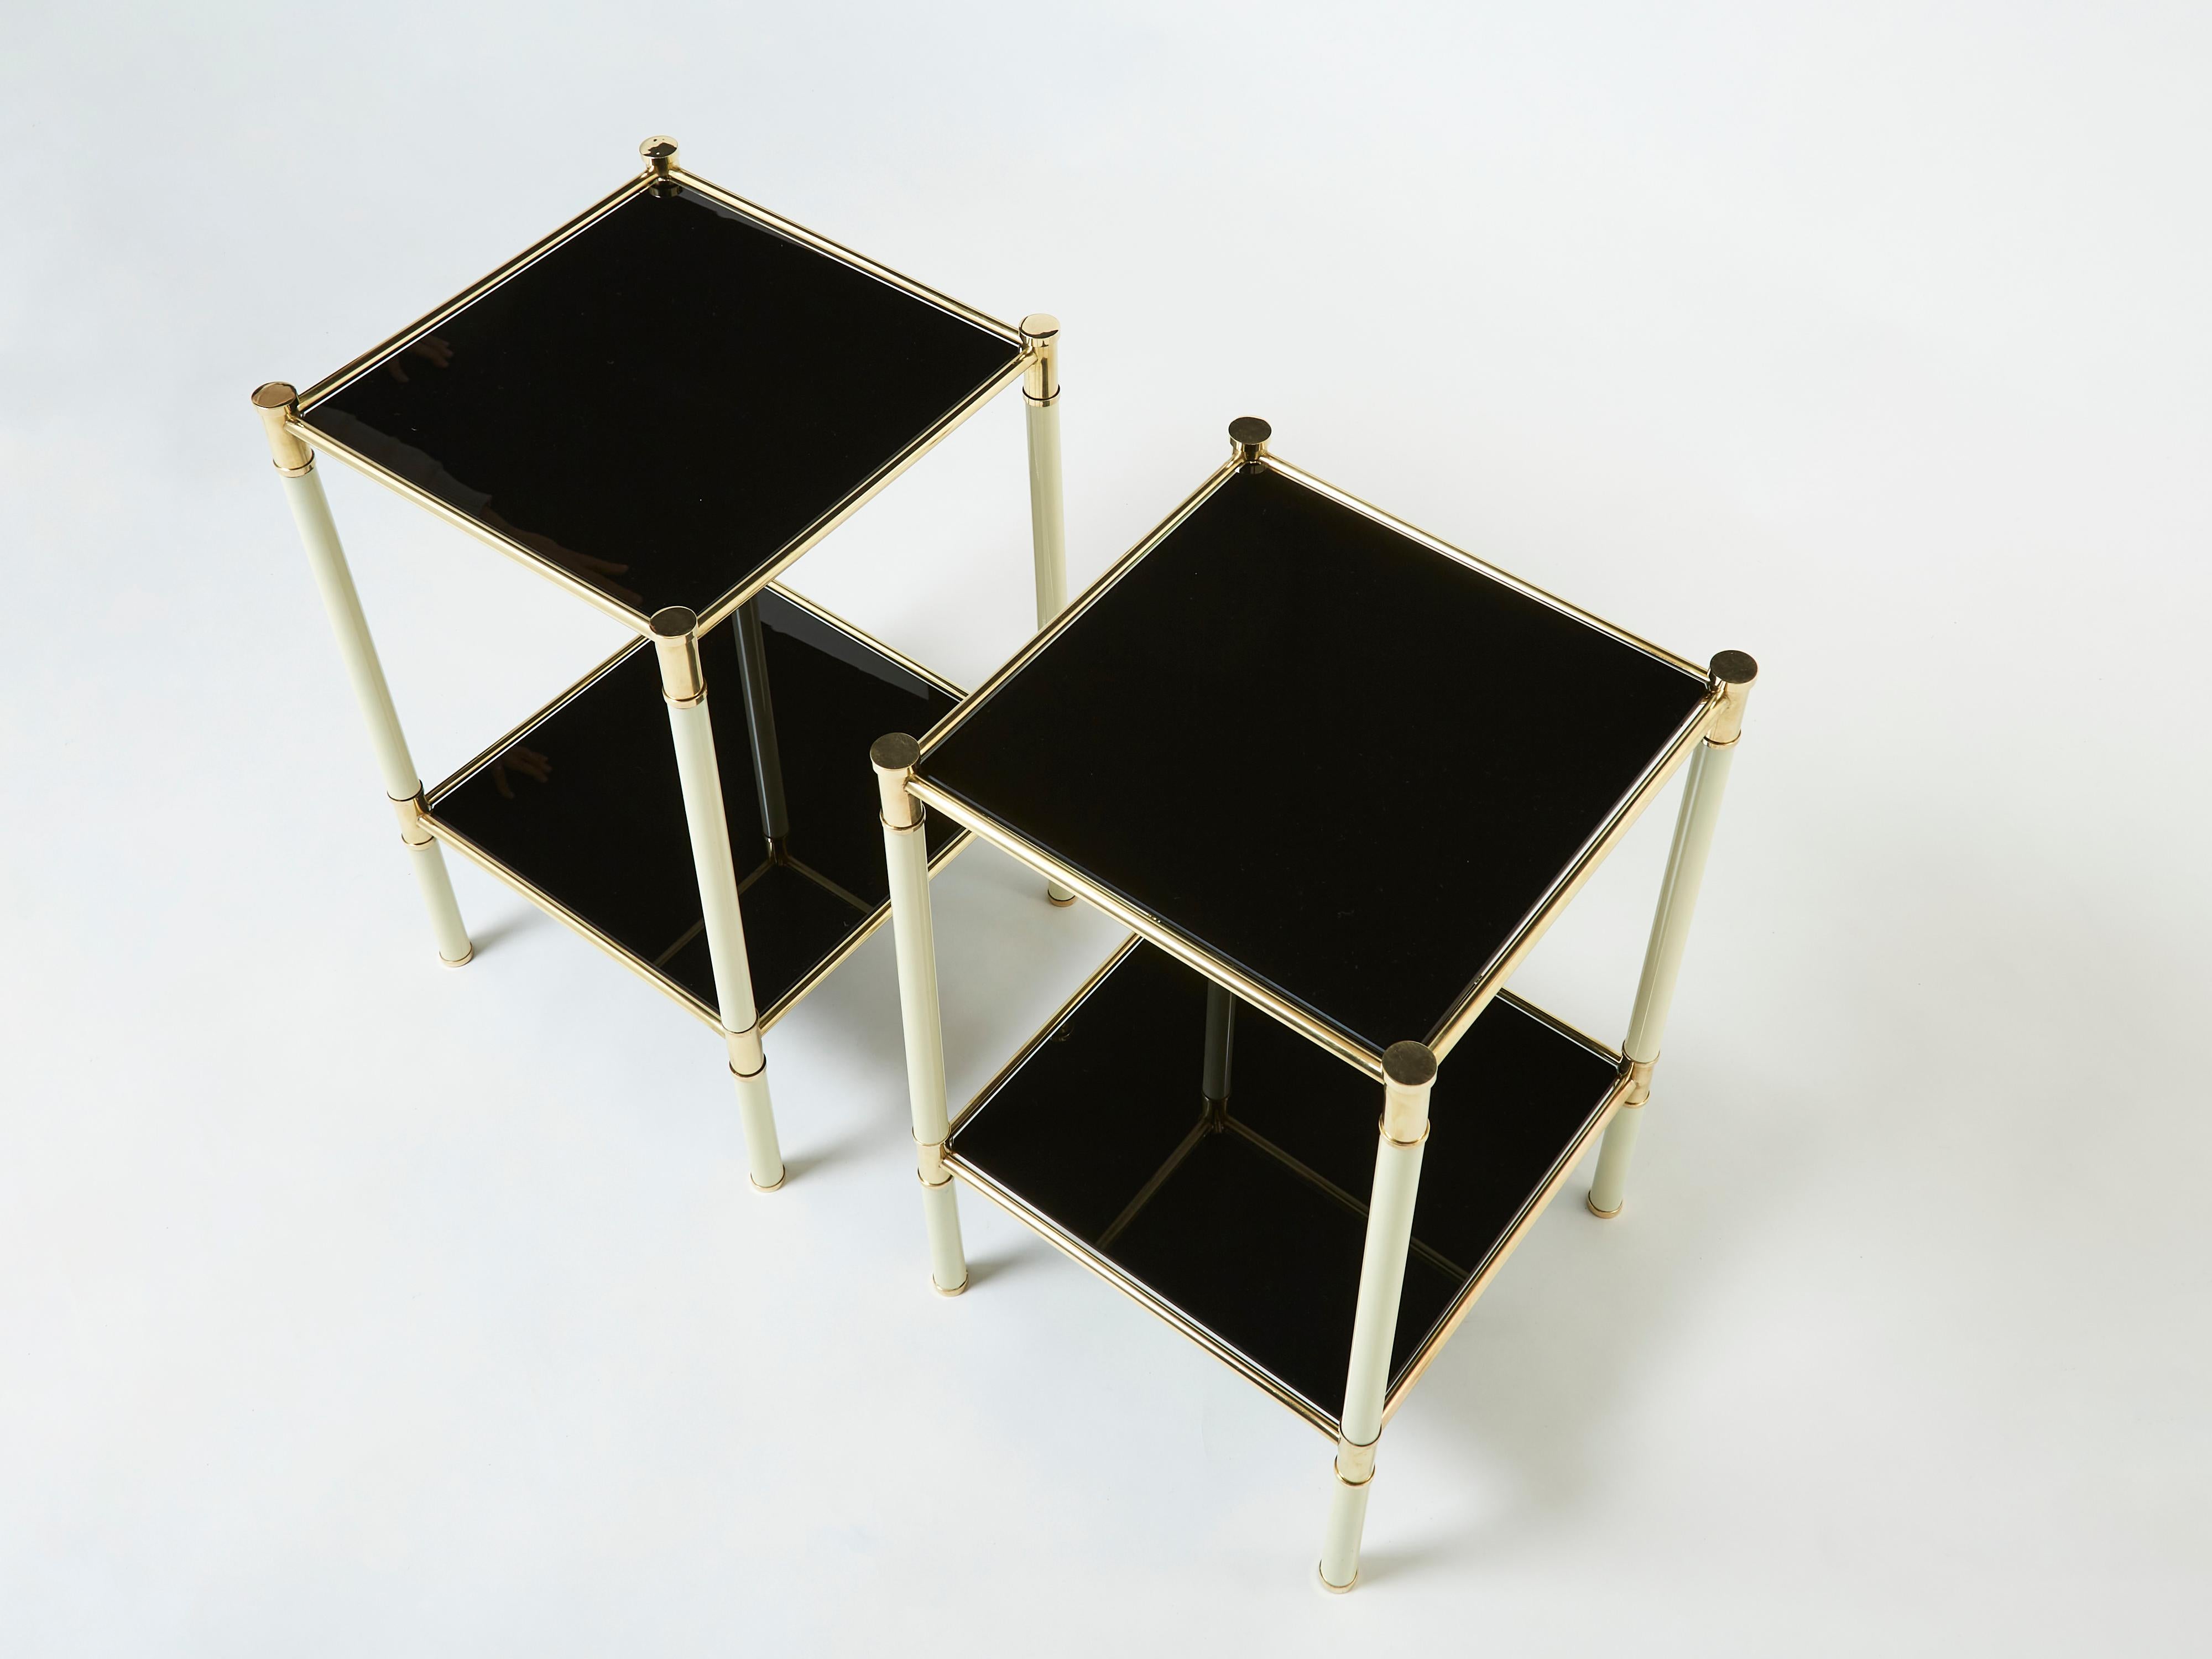 This pair of two-tier end tables, or nightstands, were designed by Italian mid-century modern designer Tommaso Barbi. They were created with off white metal feet with brass accents, and beautiful black opaline glass tops circa 1970. The two-tier